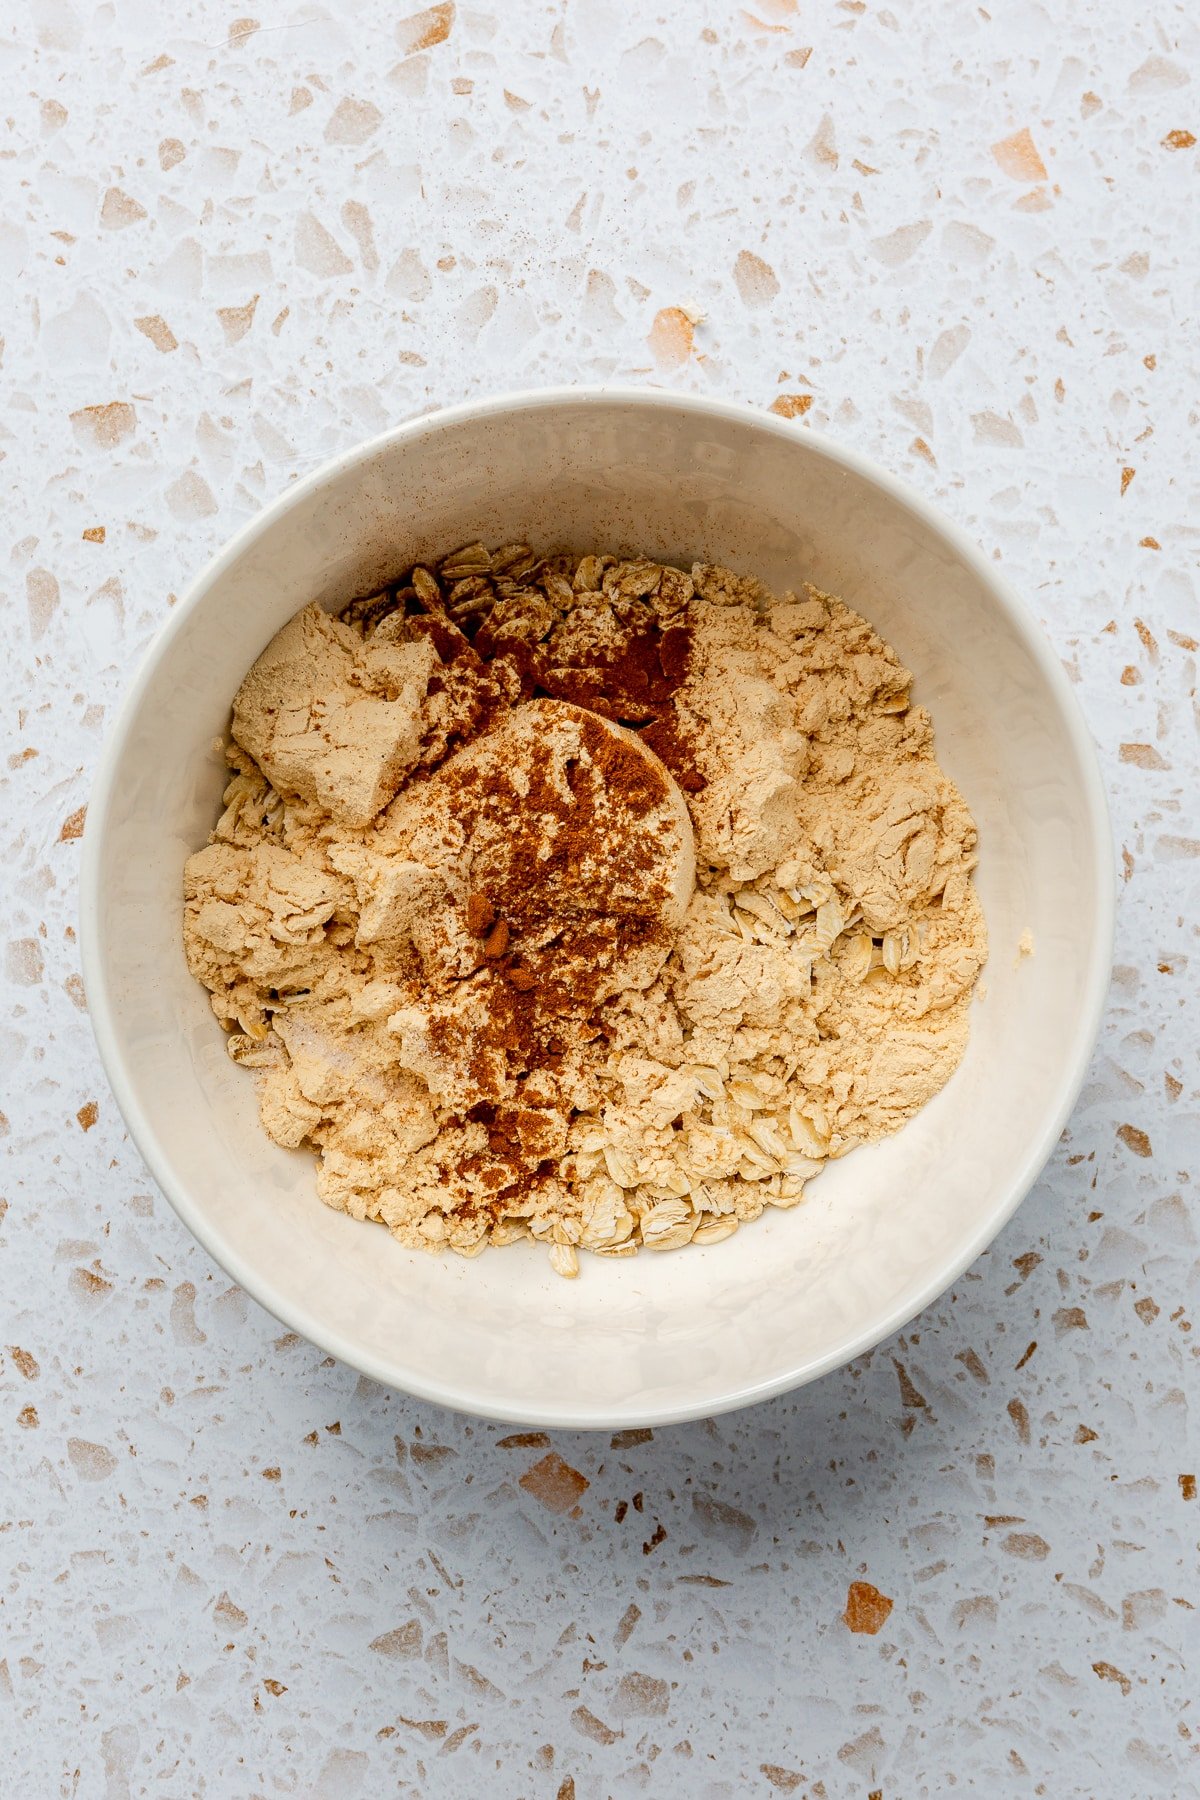 Ingredients for hot protein oatmeal have been placed into a white mixing bowl.